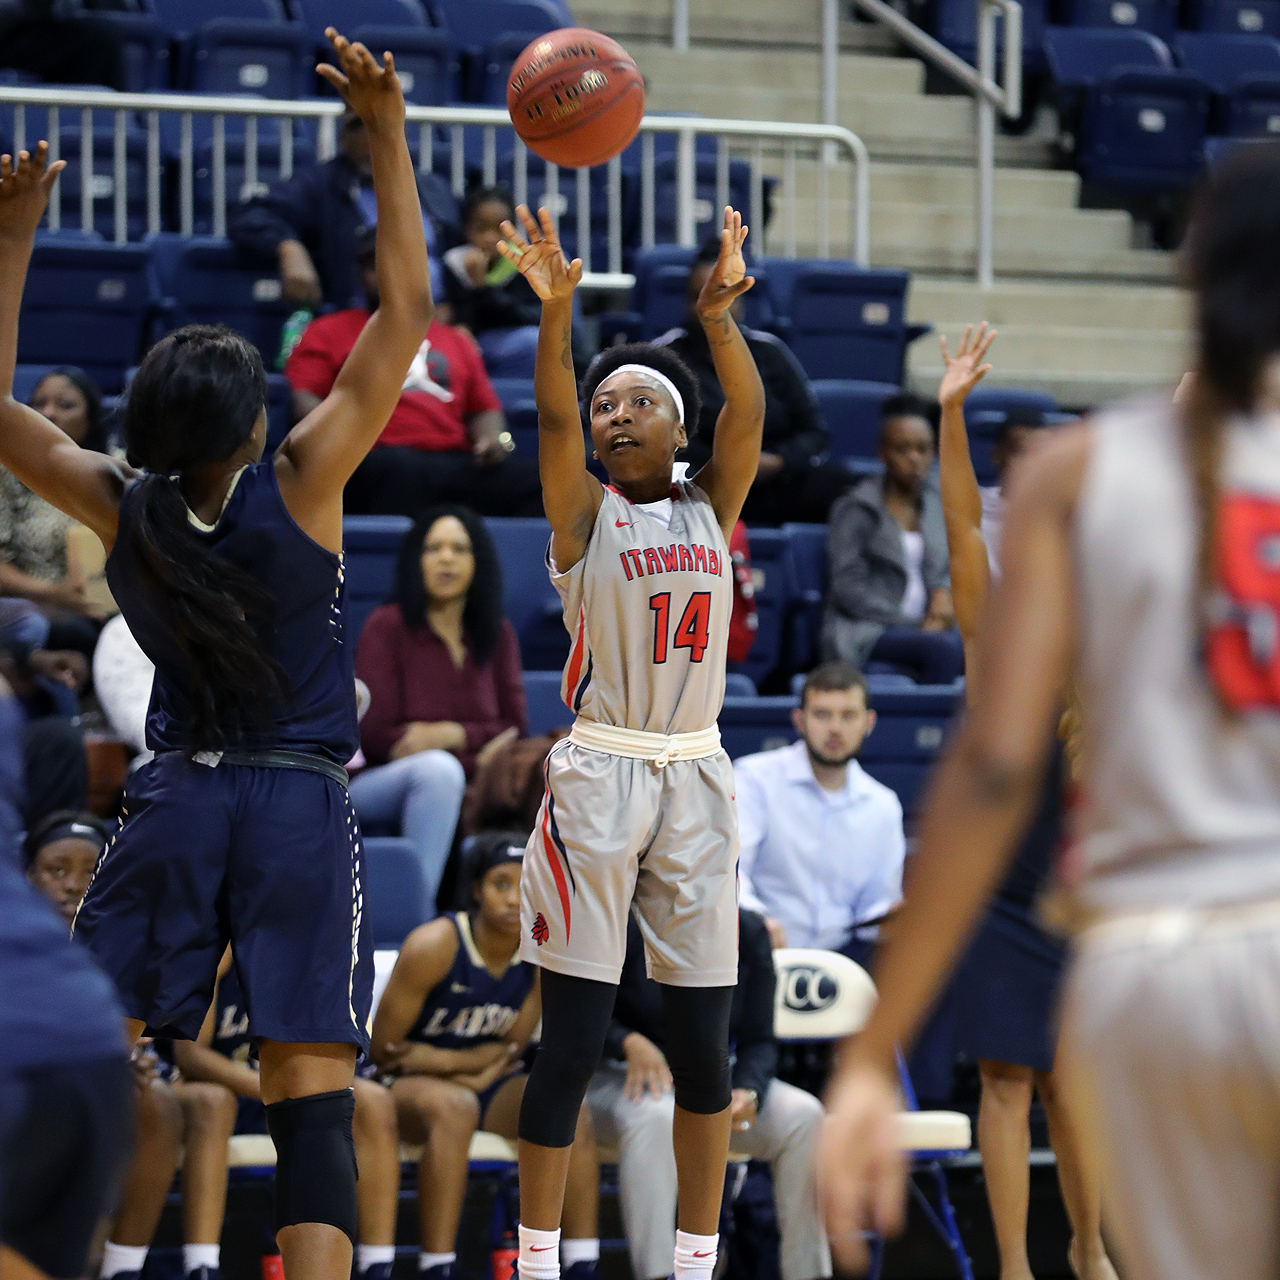 Lady Indians race to 78-57 win over Lawson State